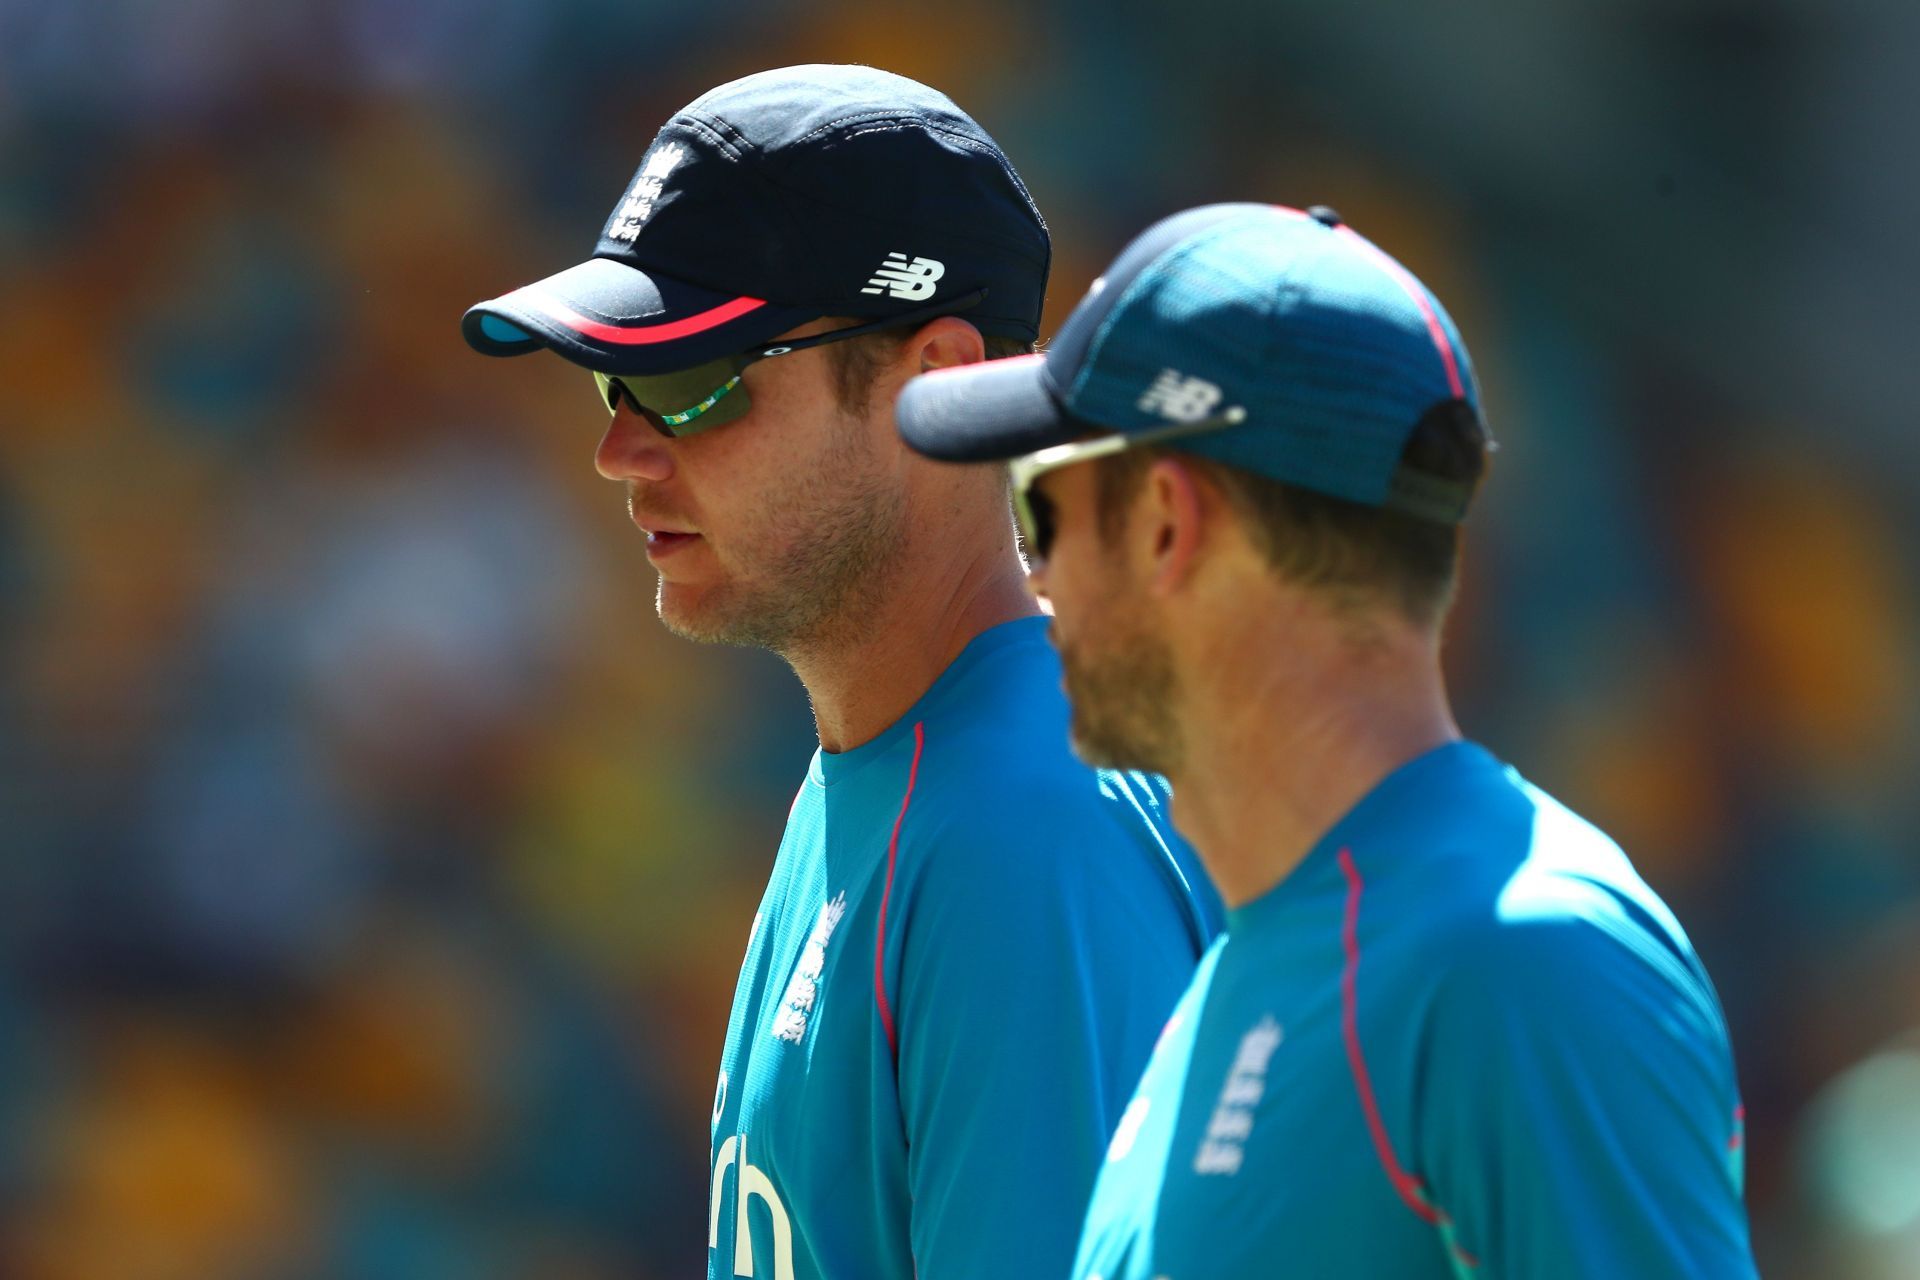 Enter Both James Anderson and Stuart Broad have been not picked for the WI vs ENG series